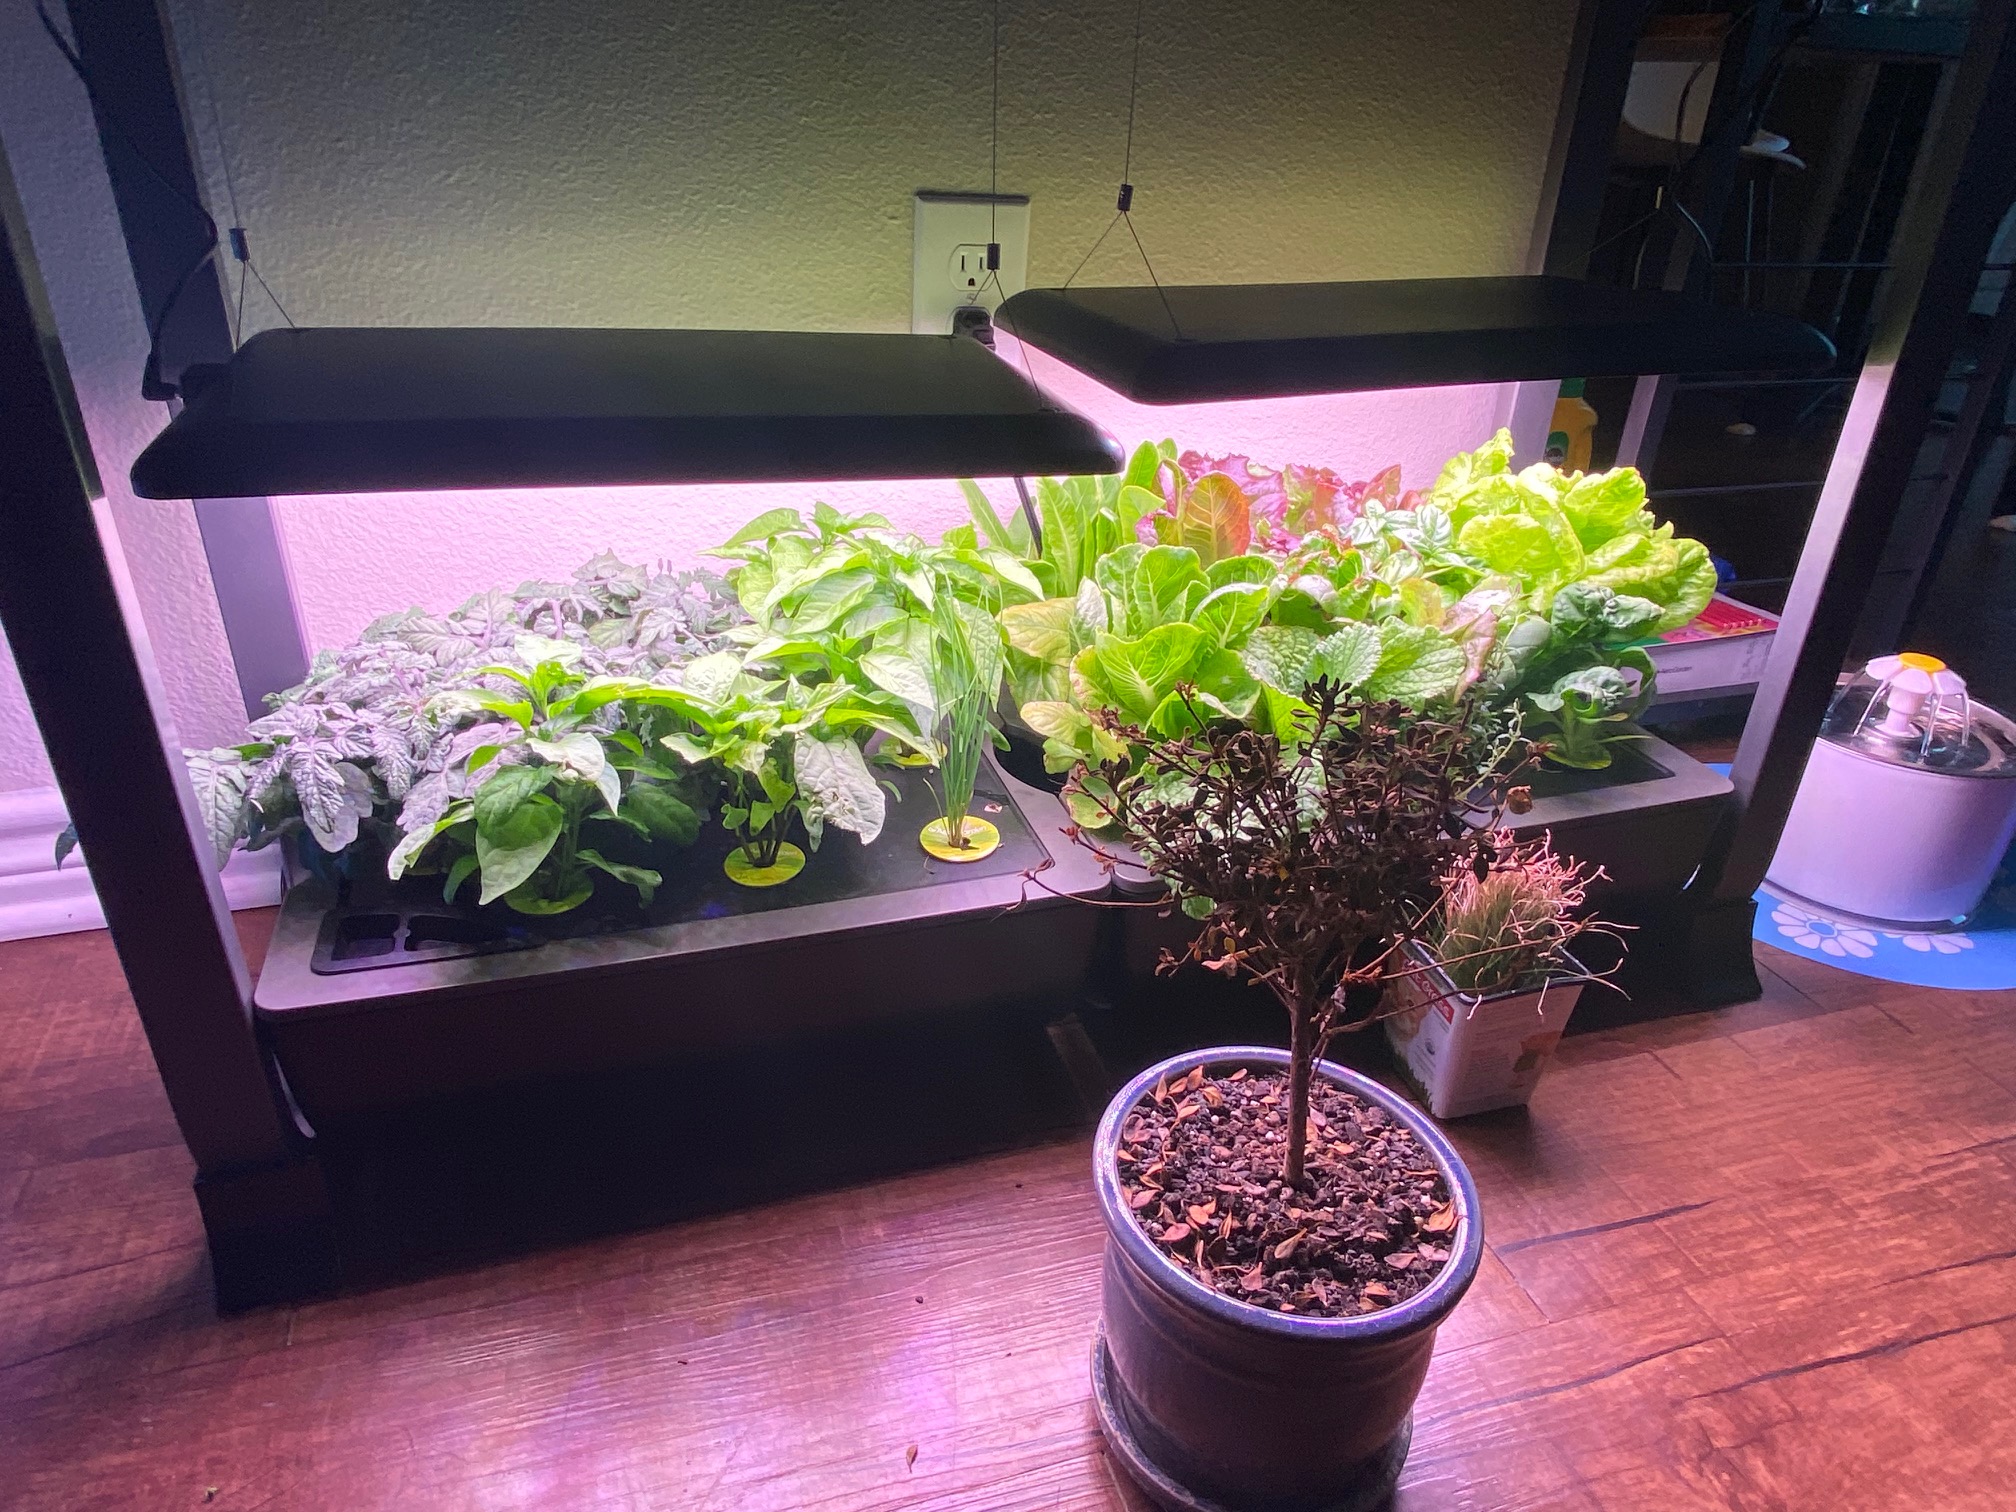 Growing Veggies On Your Countertop: Why Aerogardens Flourish During The